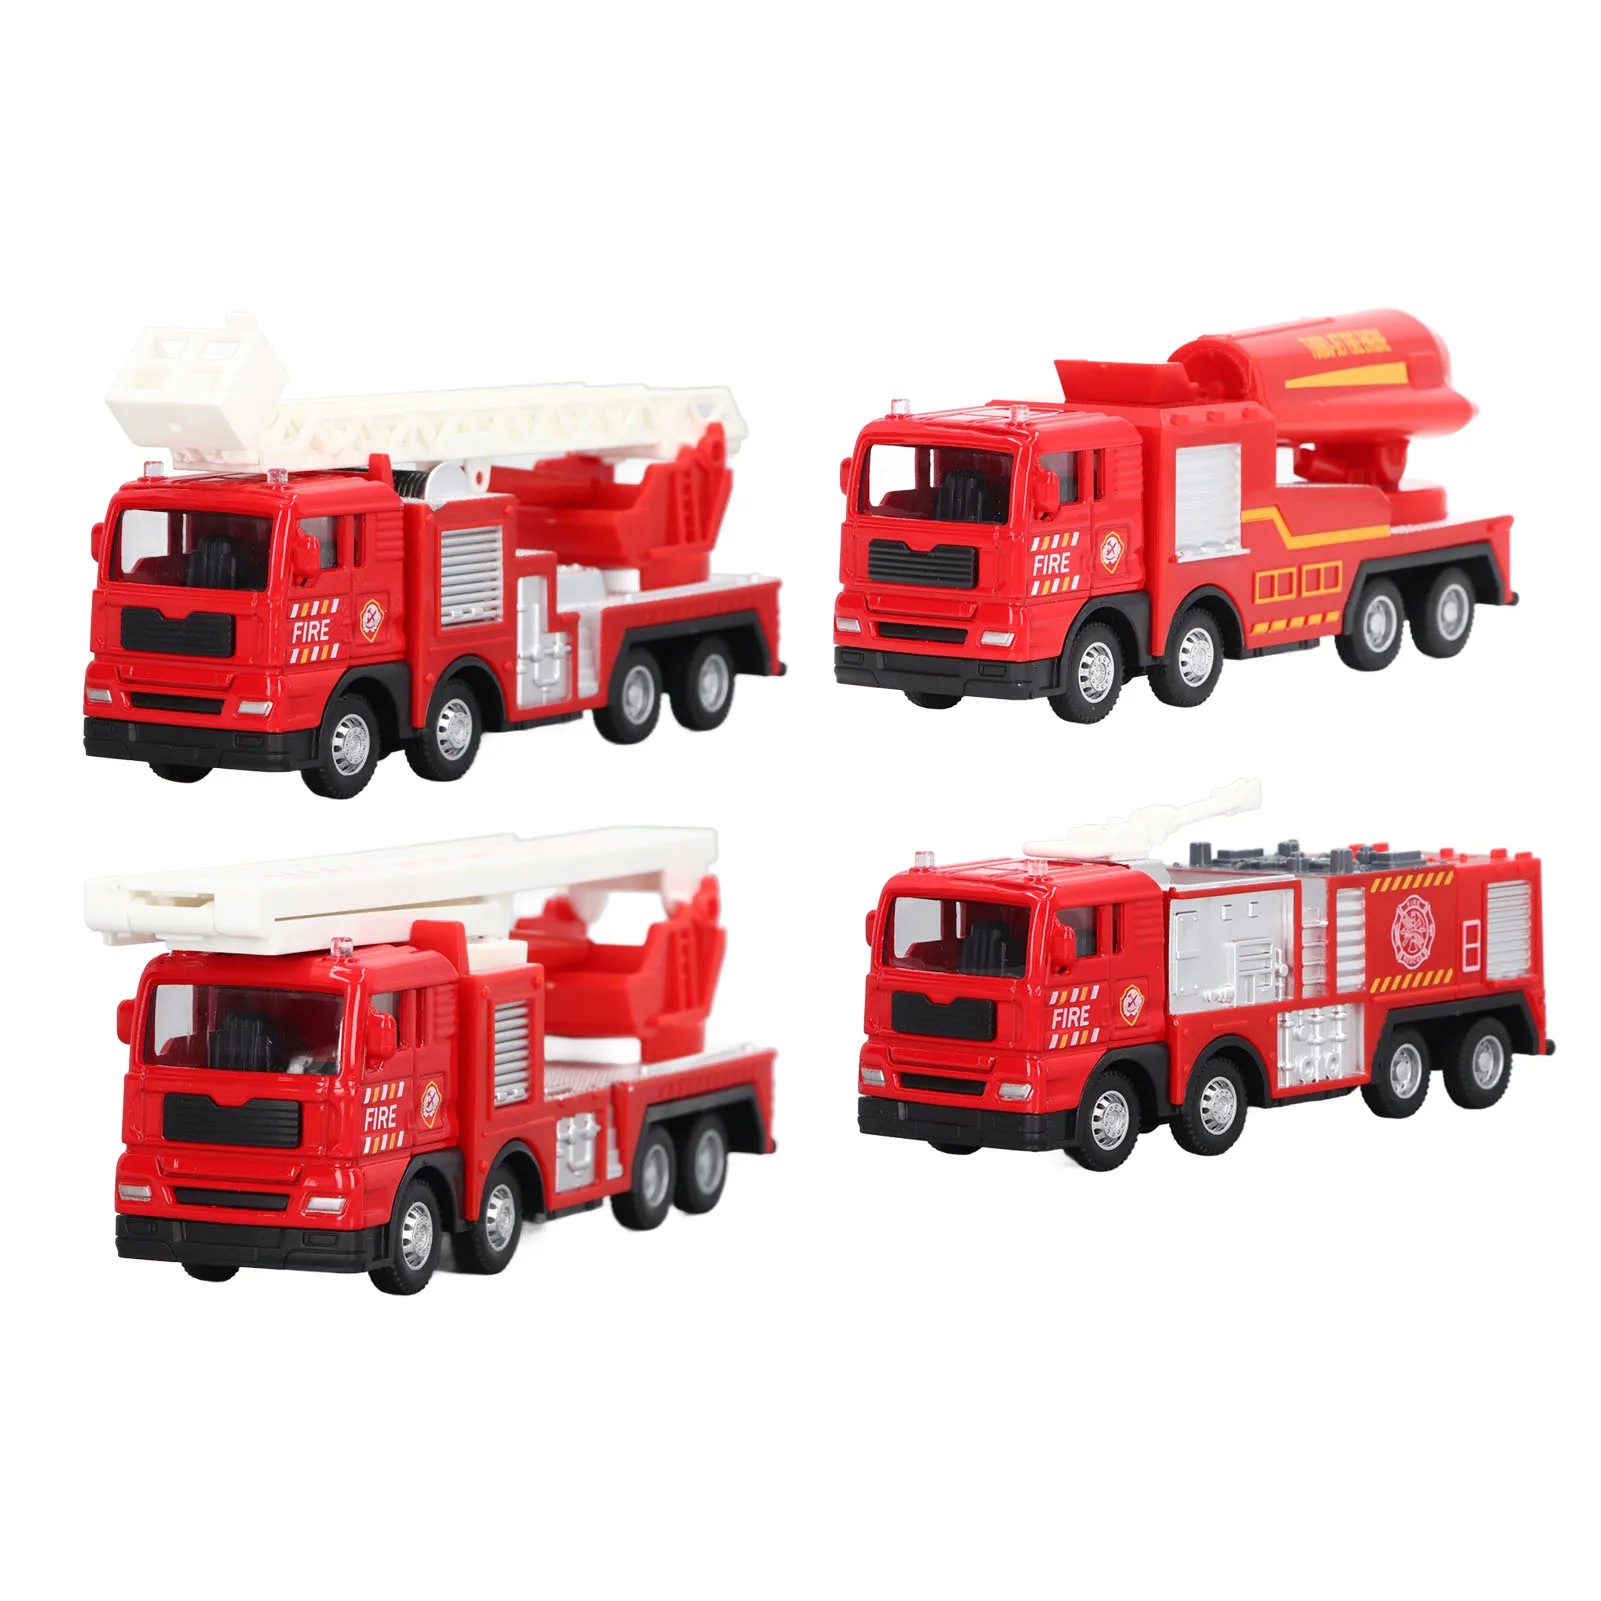 1:55 Fire Truck Toy Alloy Simulation Fire Ladder Truck Sprinkler Truck Tower Crane Toy For Home Decoration Birthday Gift 3 5cm embossed sticker seal label gift wrapping sticker wedding birthday party decoration sticker fire lacquer seal seal sticker